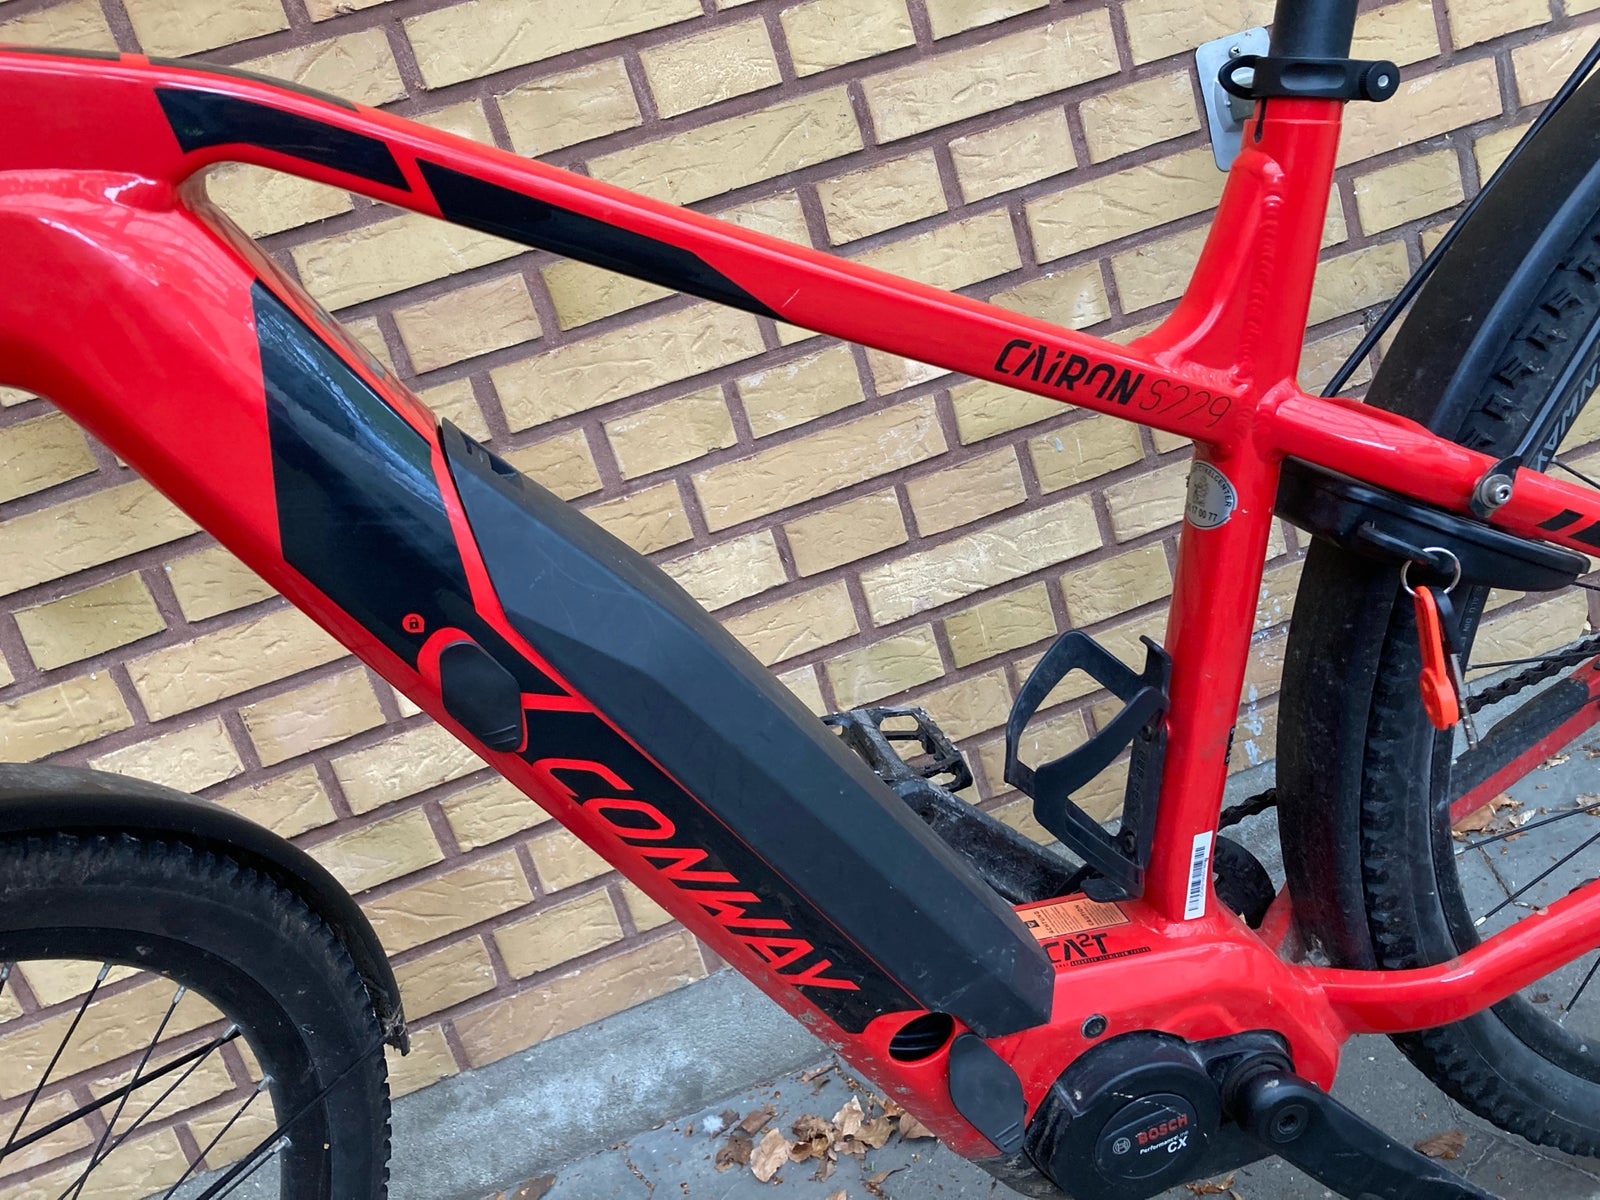 Conway Cairon , anden mountainbike, 29 tommer